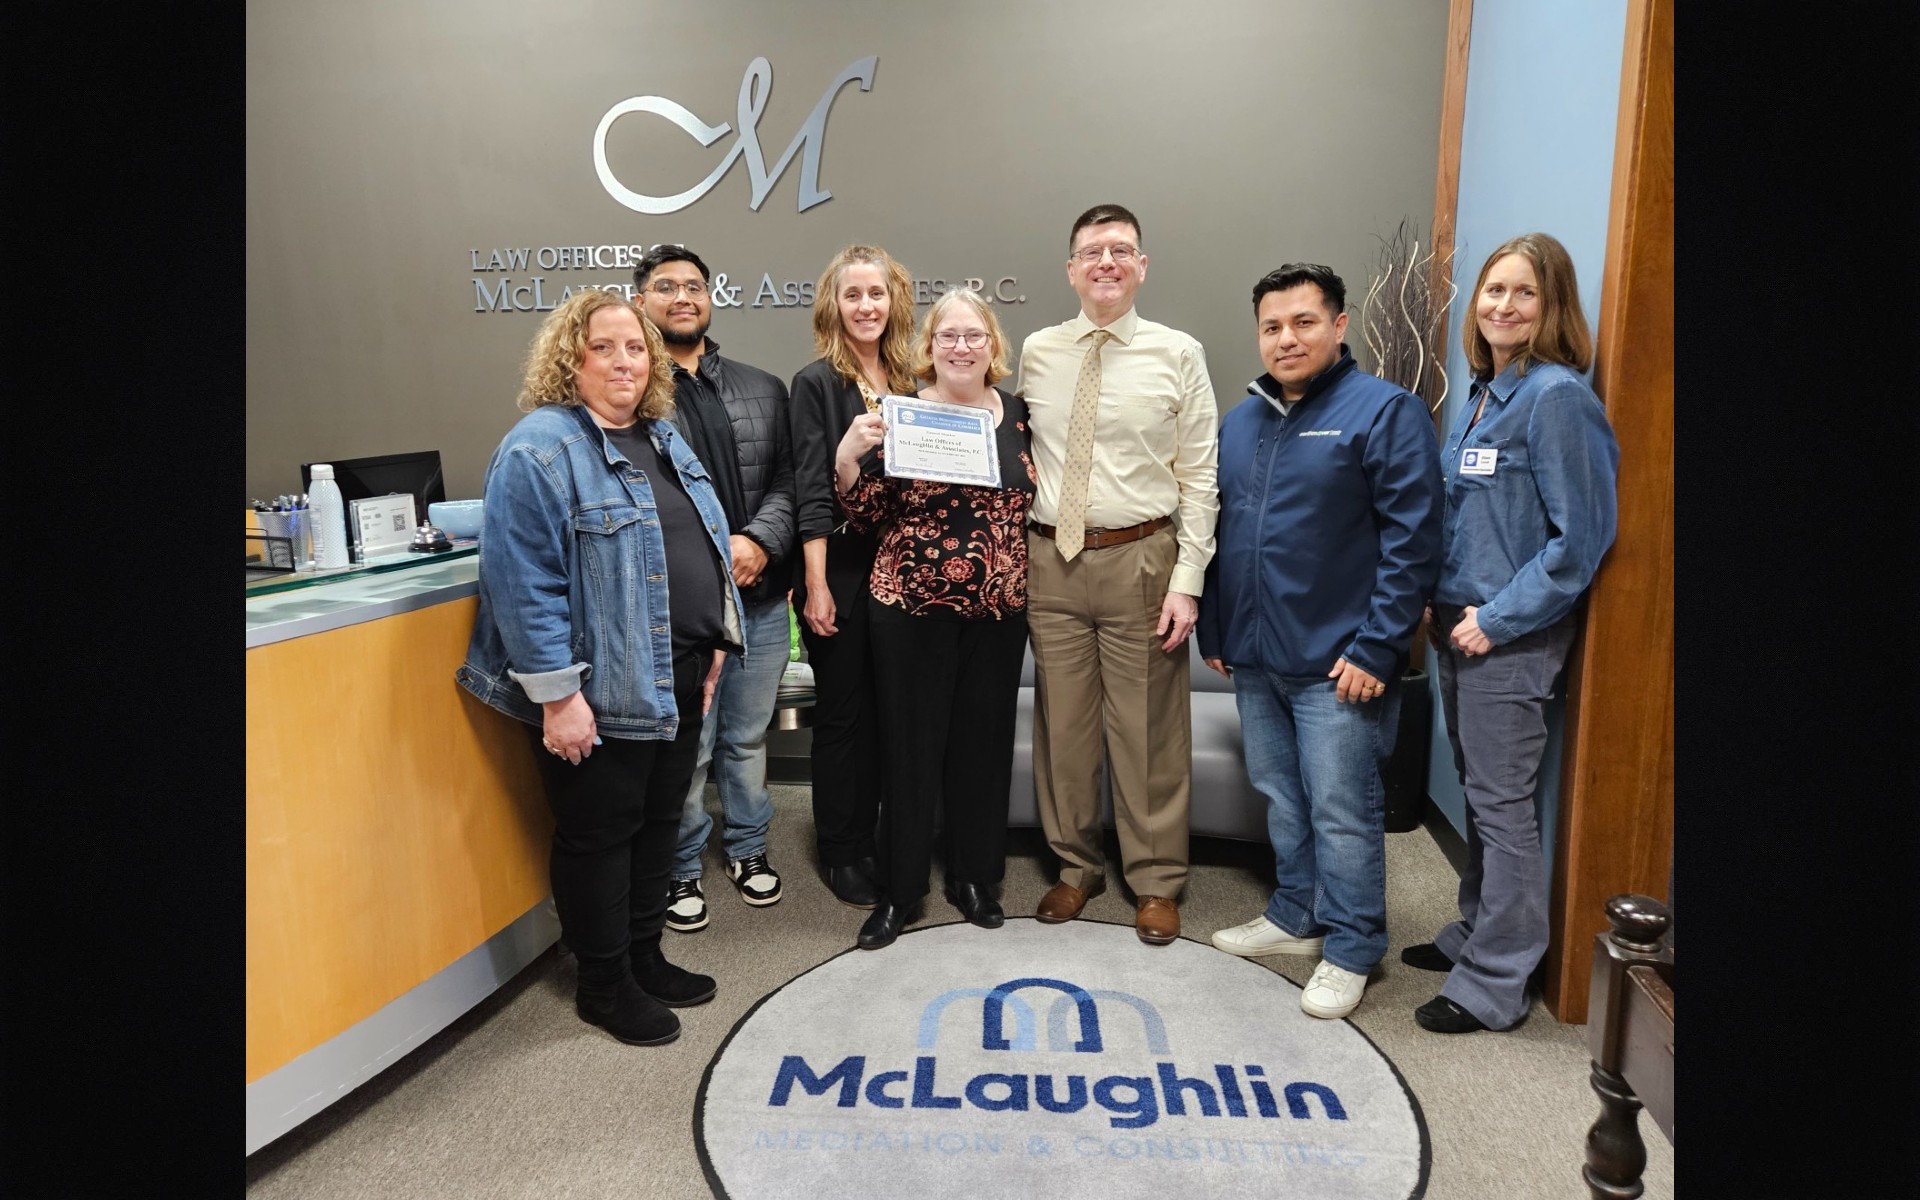 Welcome new chamber member Law Offices of McLaughlin and Associates!